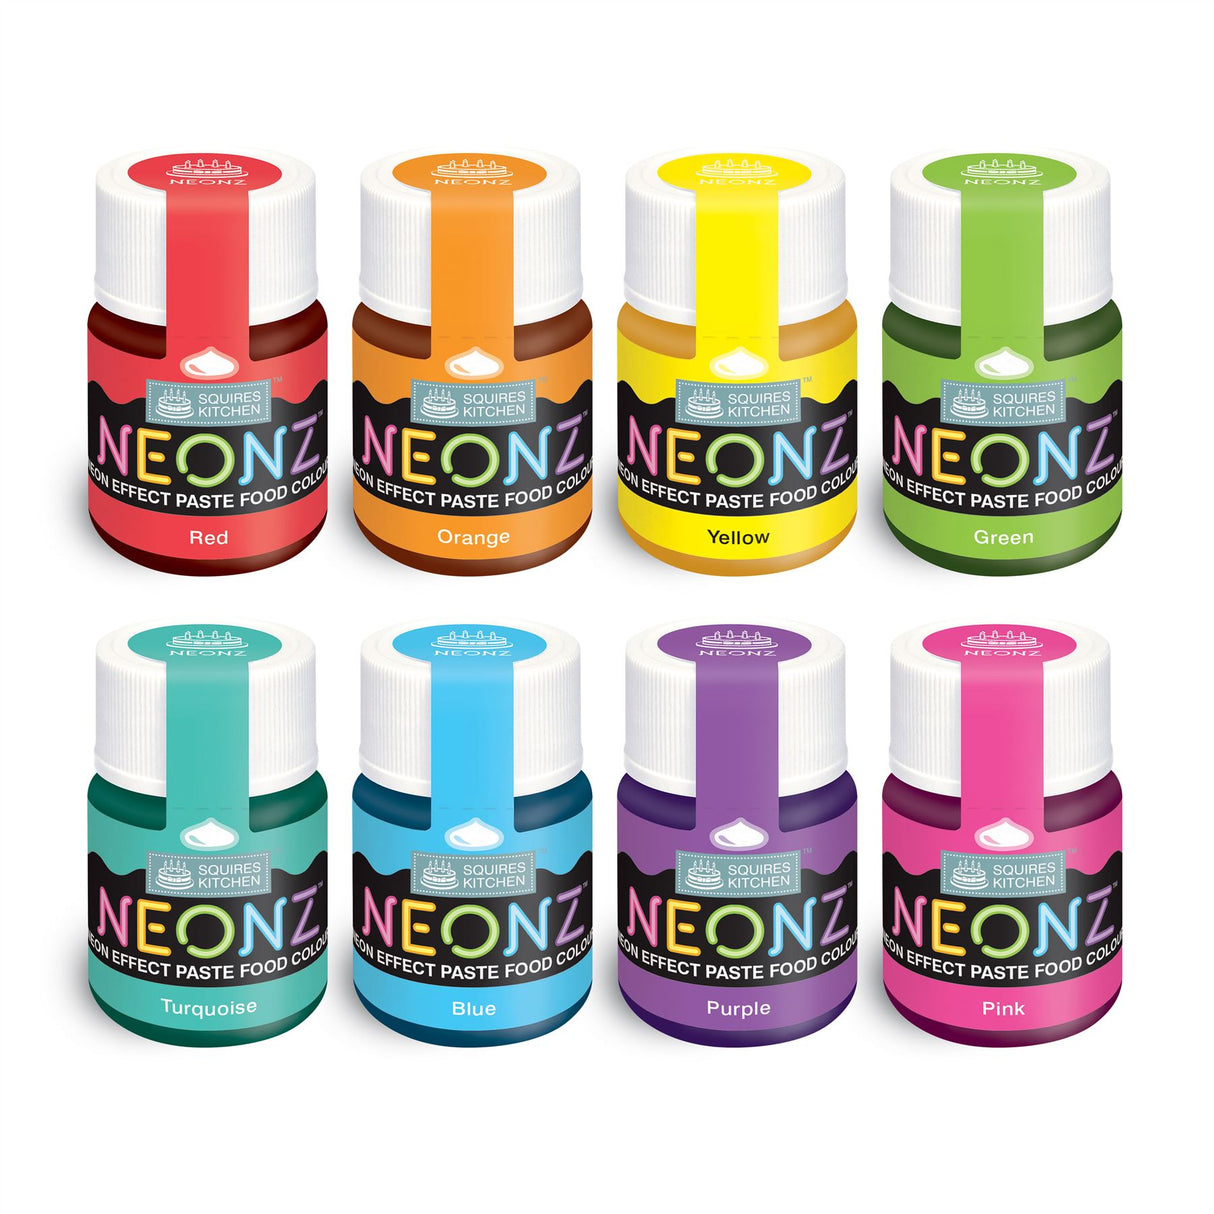 Squires Kitchen NEONZ Neon Effect Food Colouring Paste 20g - All Shades